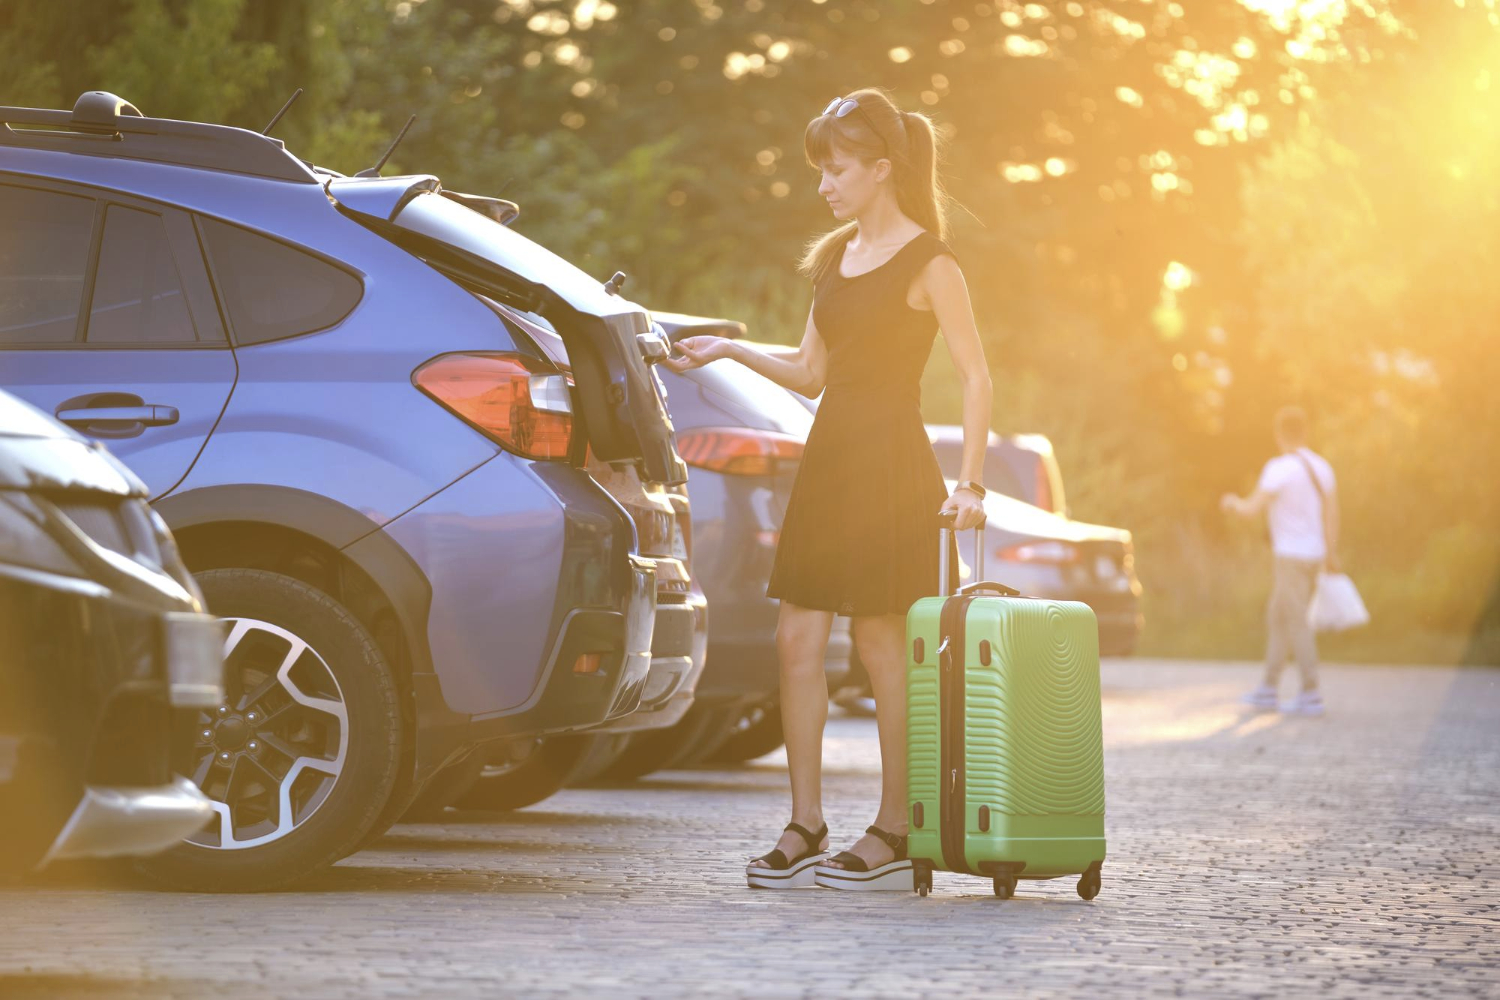 young-female-driver-putting-luggage-suitcase-bag-inside-her-car-travelling-and-vacations-concept